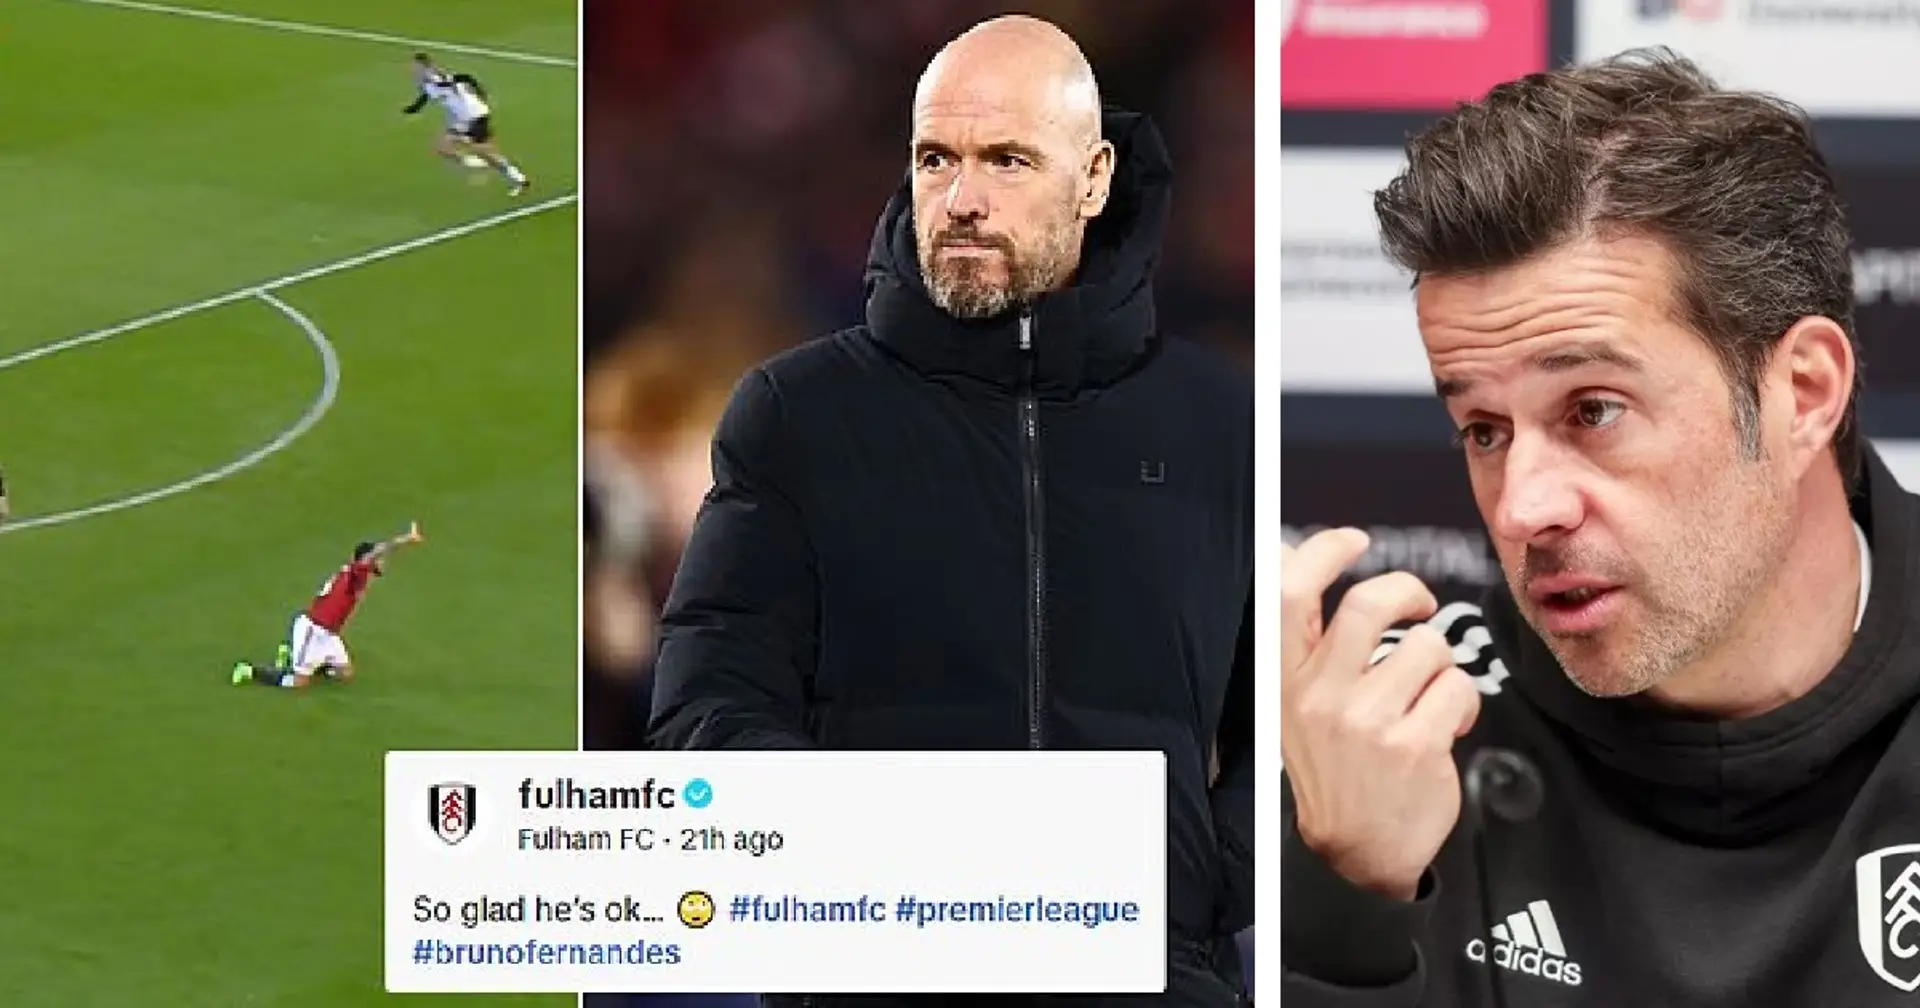 'Ten Hag defends his player': Fulham coach refuses to apologise for video mocking Fernandes 